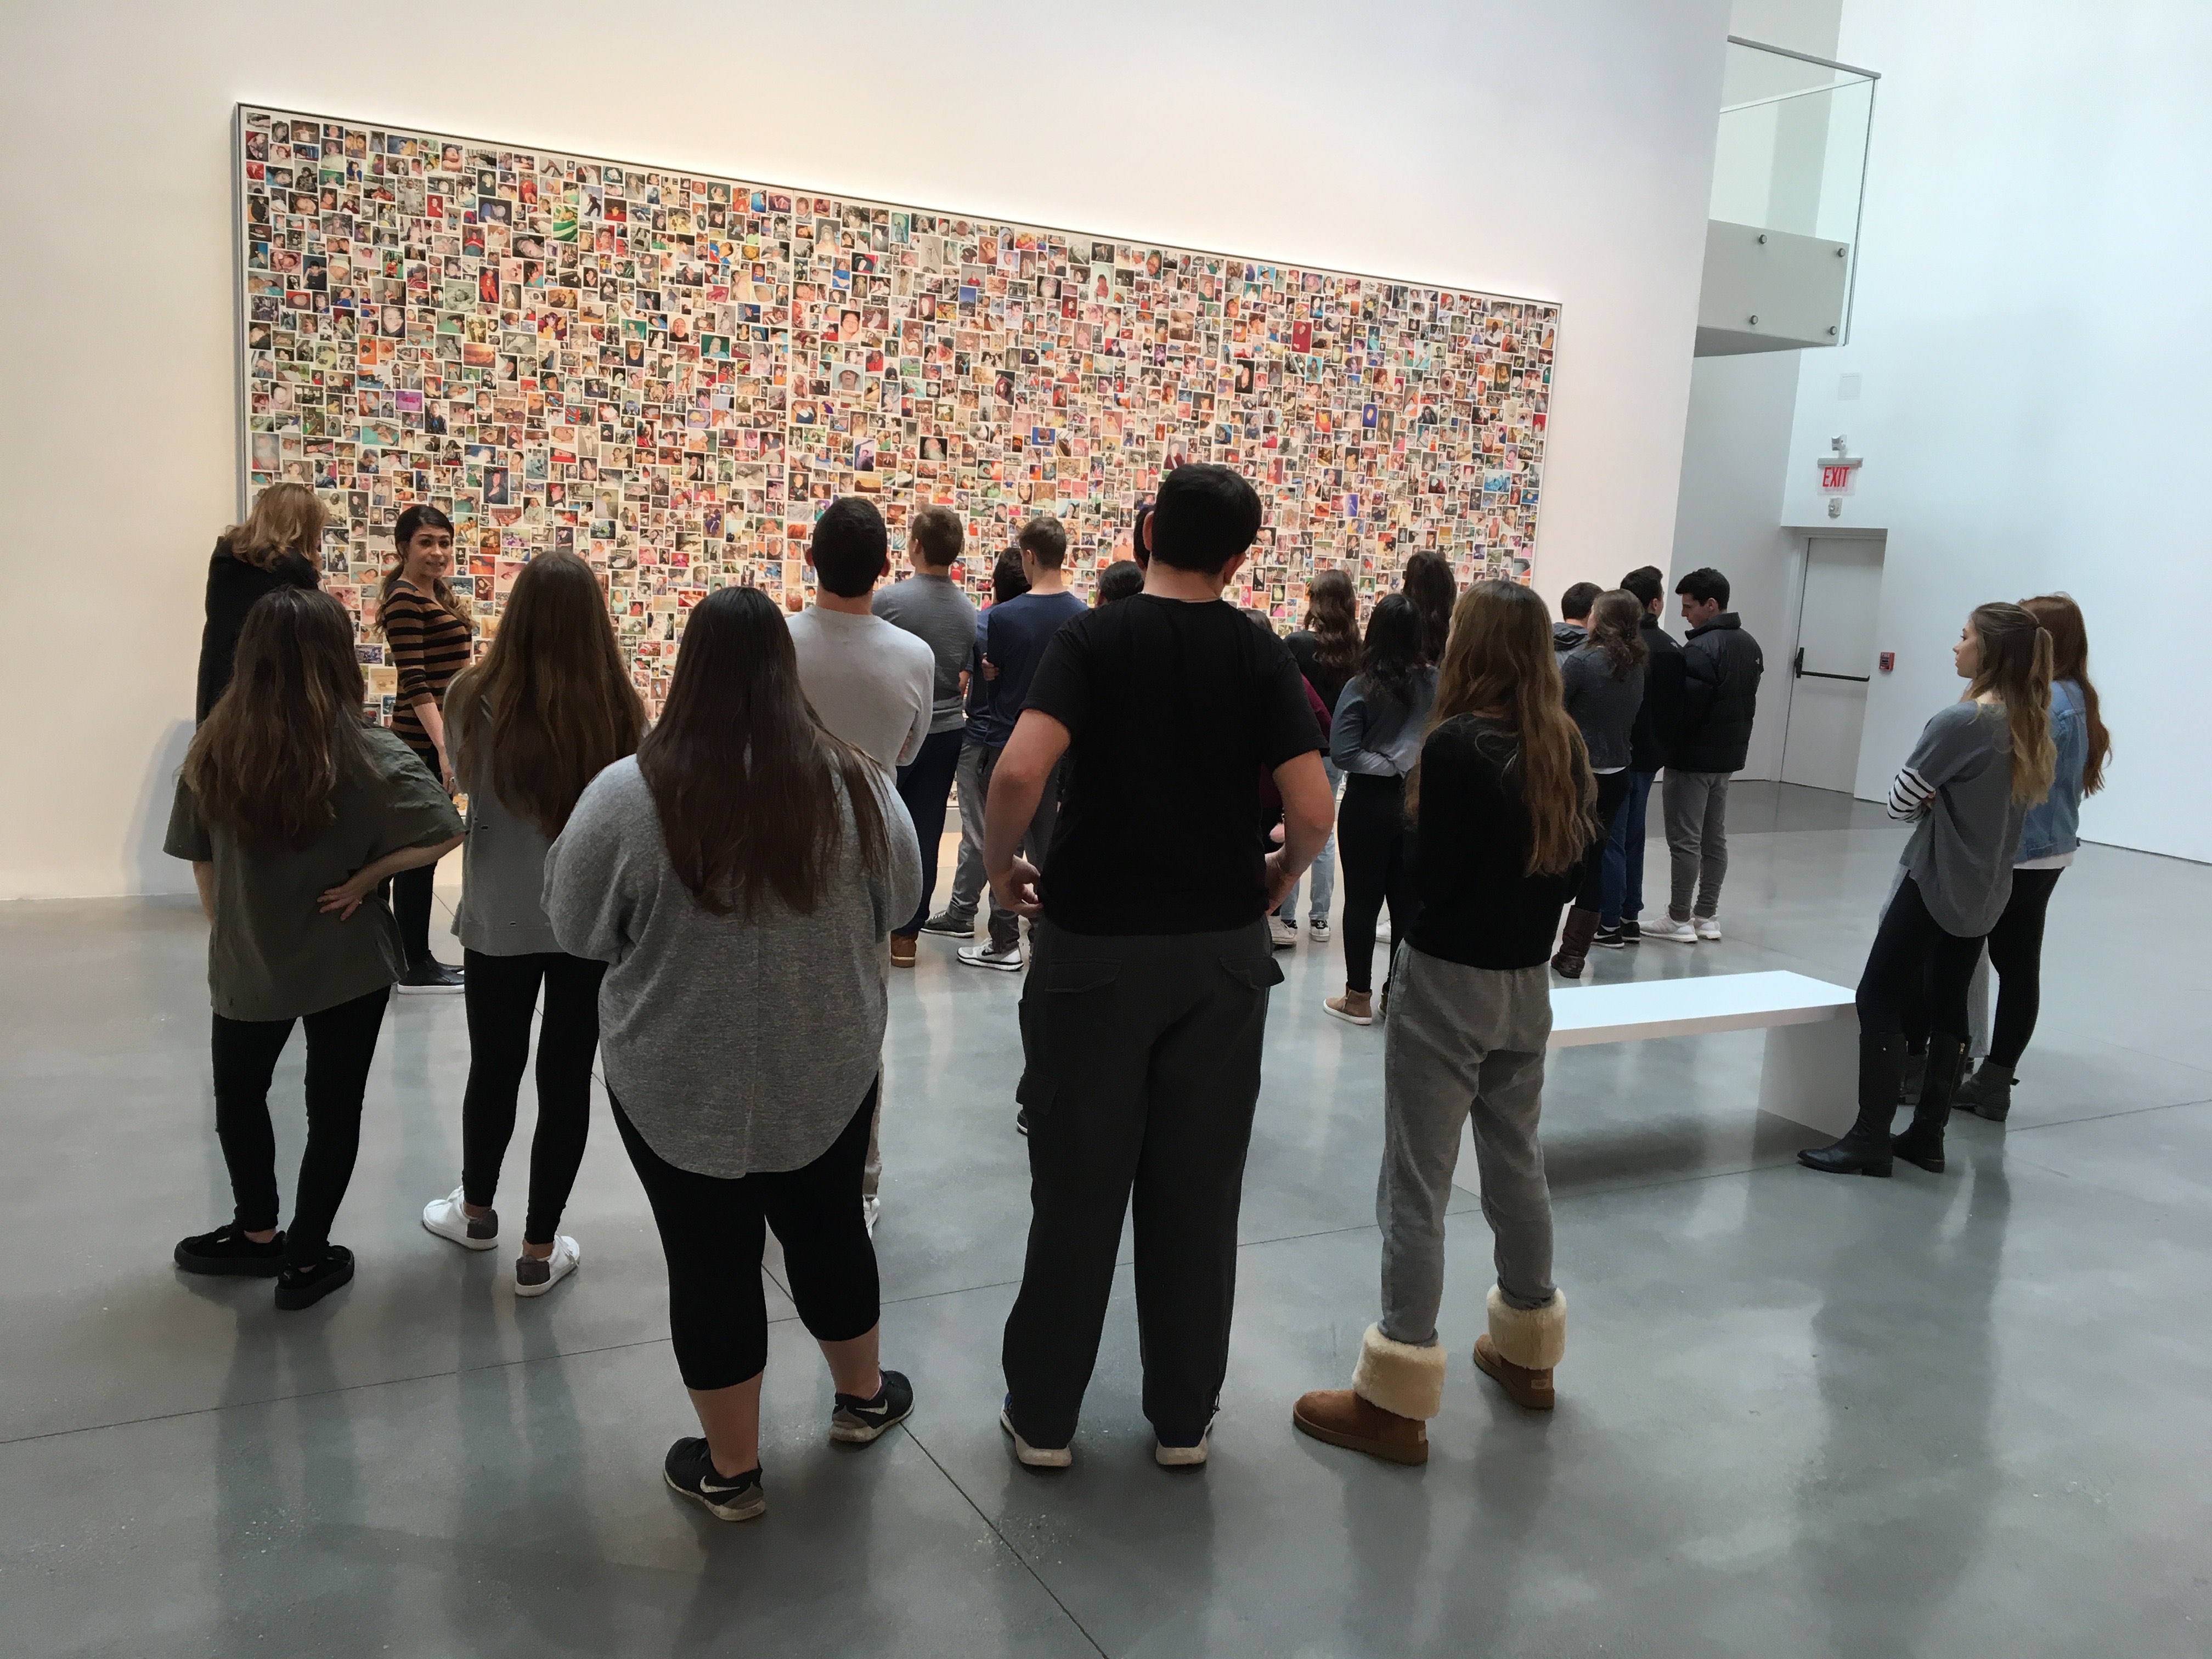 Blind Brook High School Students visit Steven Shearer's exhibition at The Brant Foundation